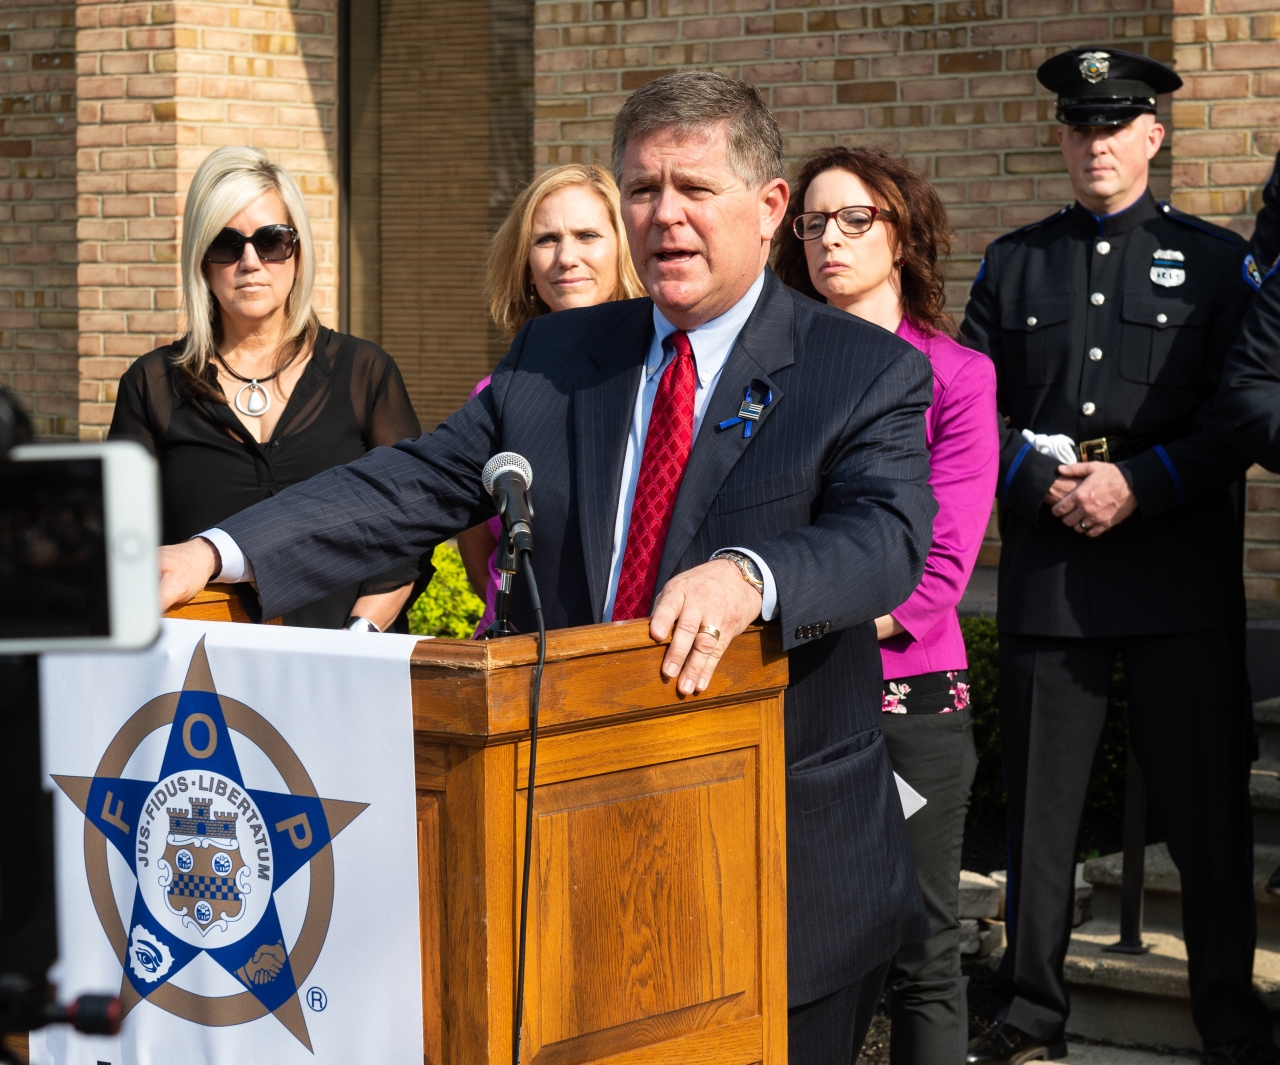 Representative Hughes Introduces Bill Reforming Death Benefits for Families of Deceased Officers